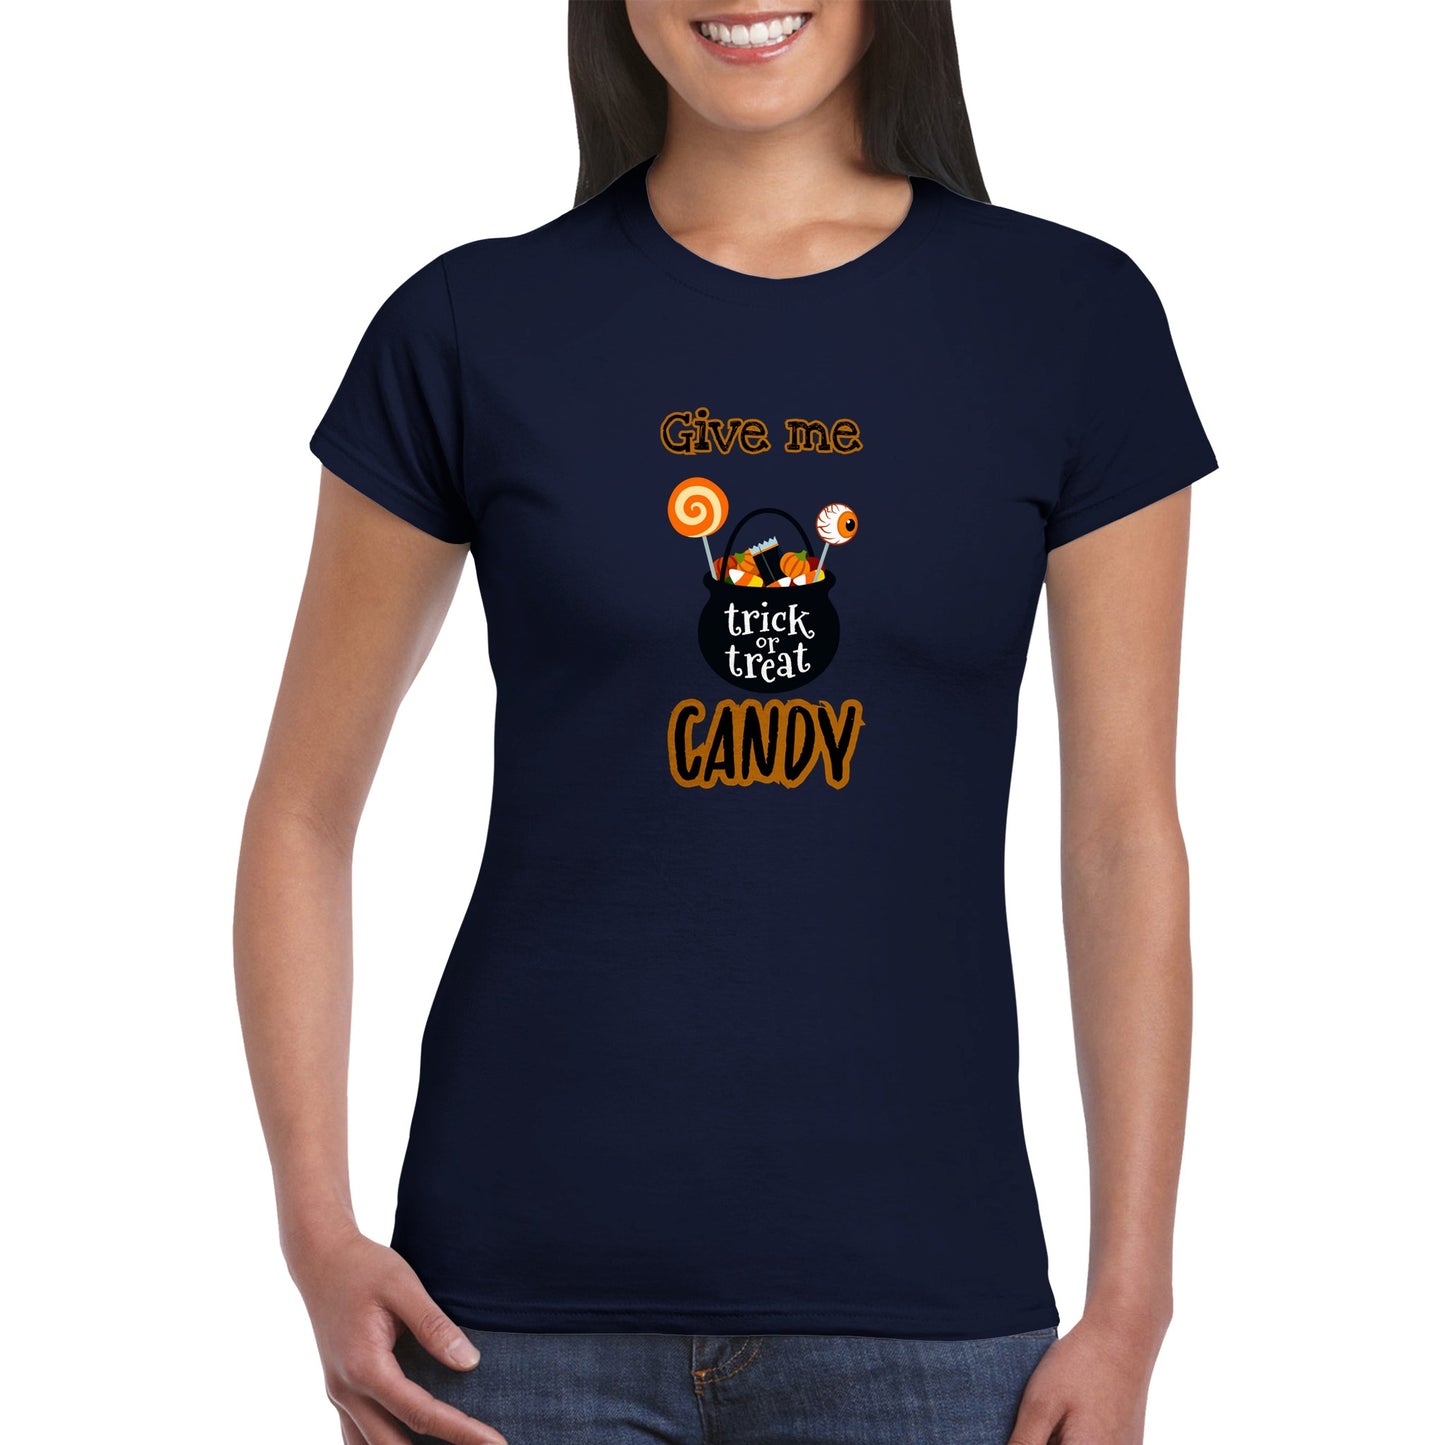 Give me candy -Classic Womens Crewneck T-shirt